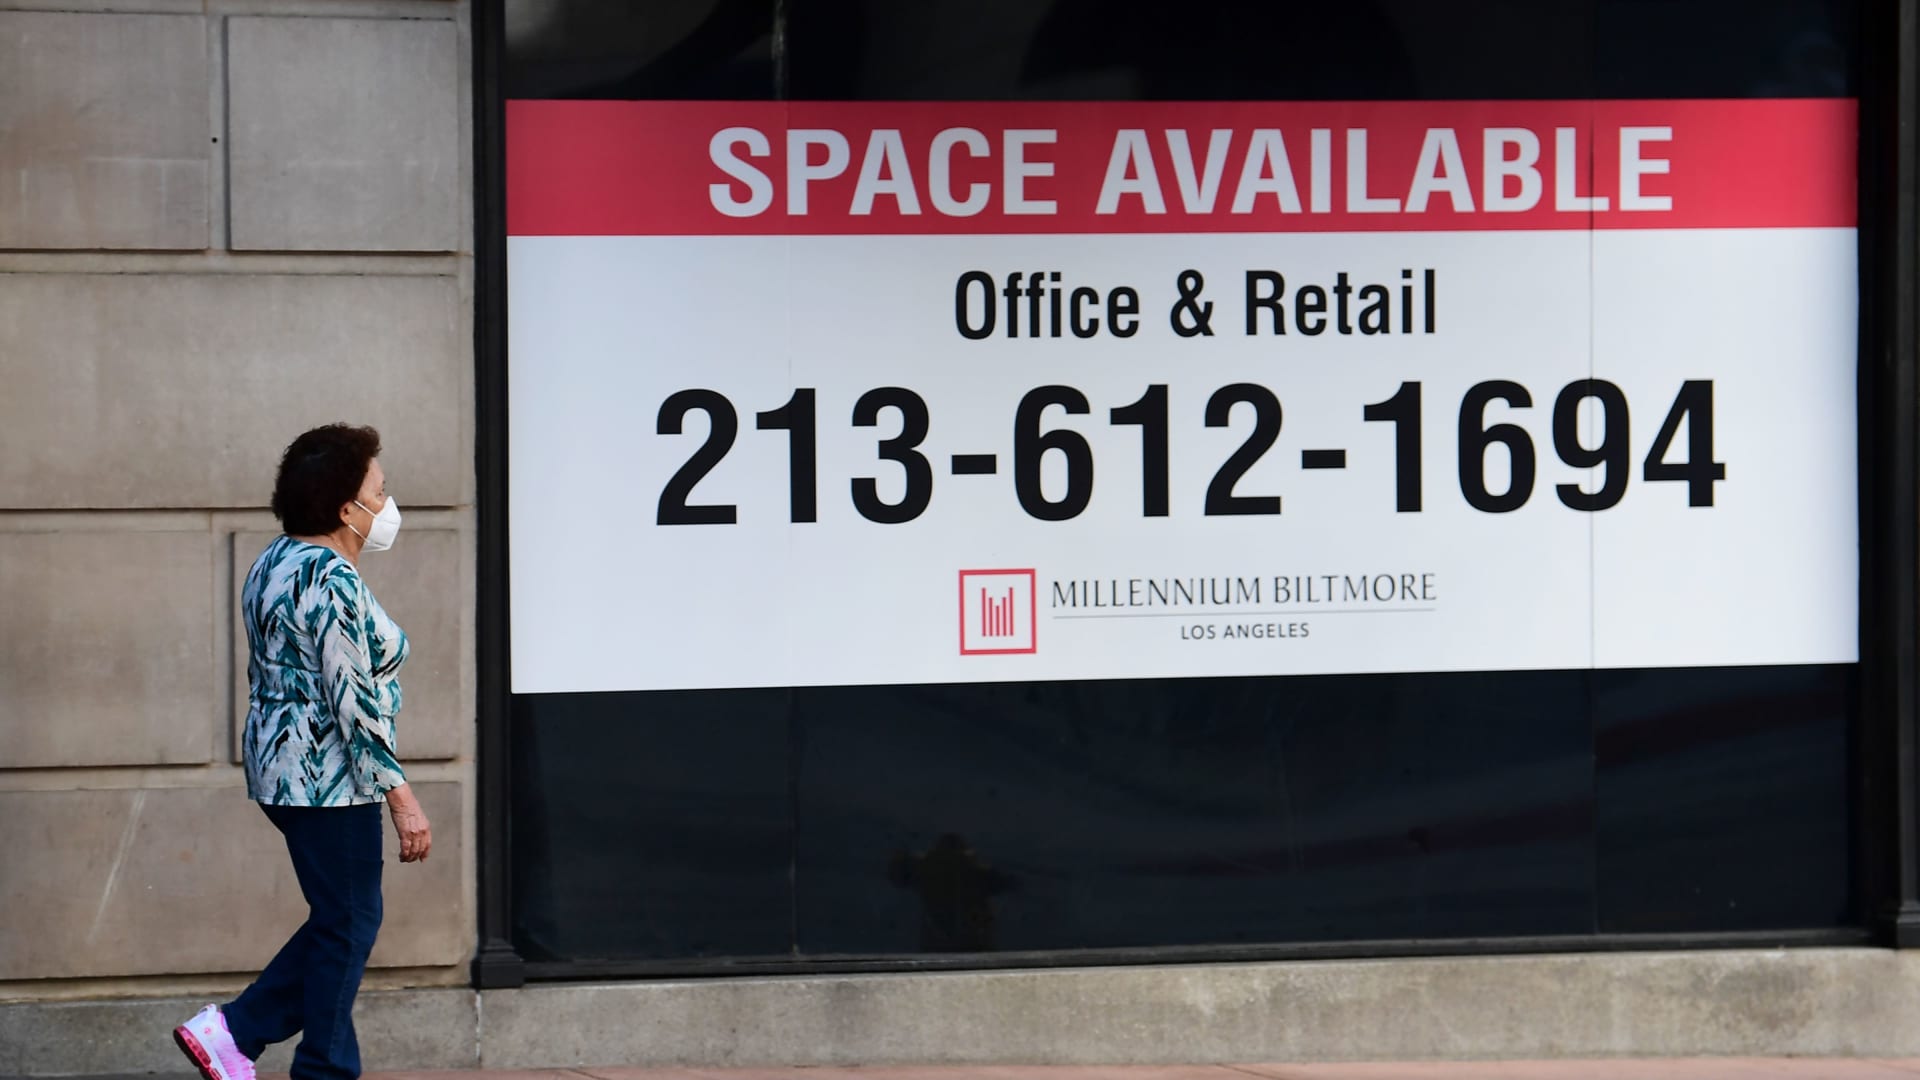 A woman wearing her facemask walks past advertising for office and retail space available in downtown Los Angeles, California on May 4, 2020.